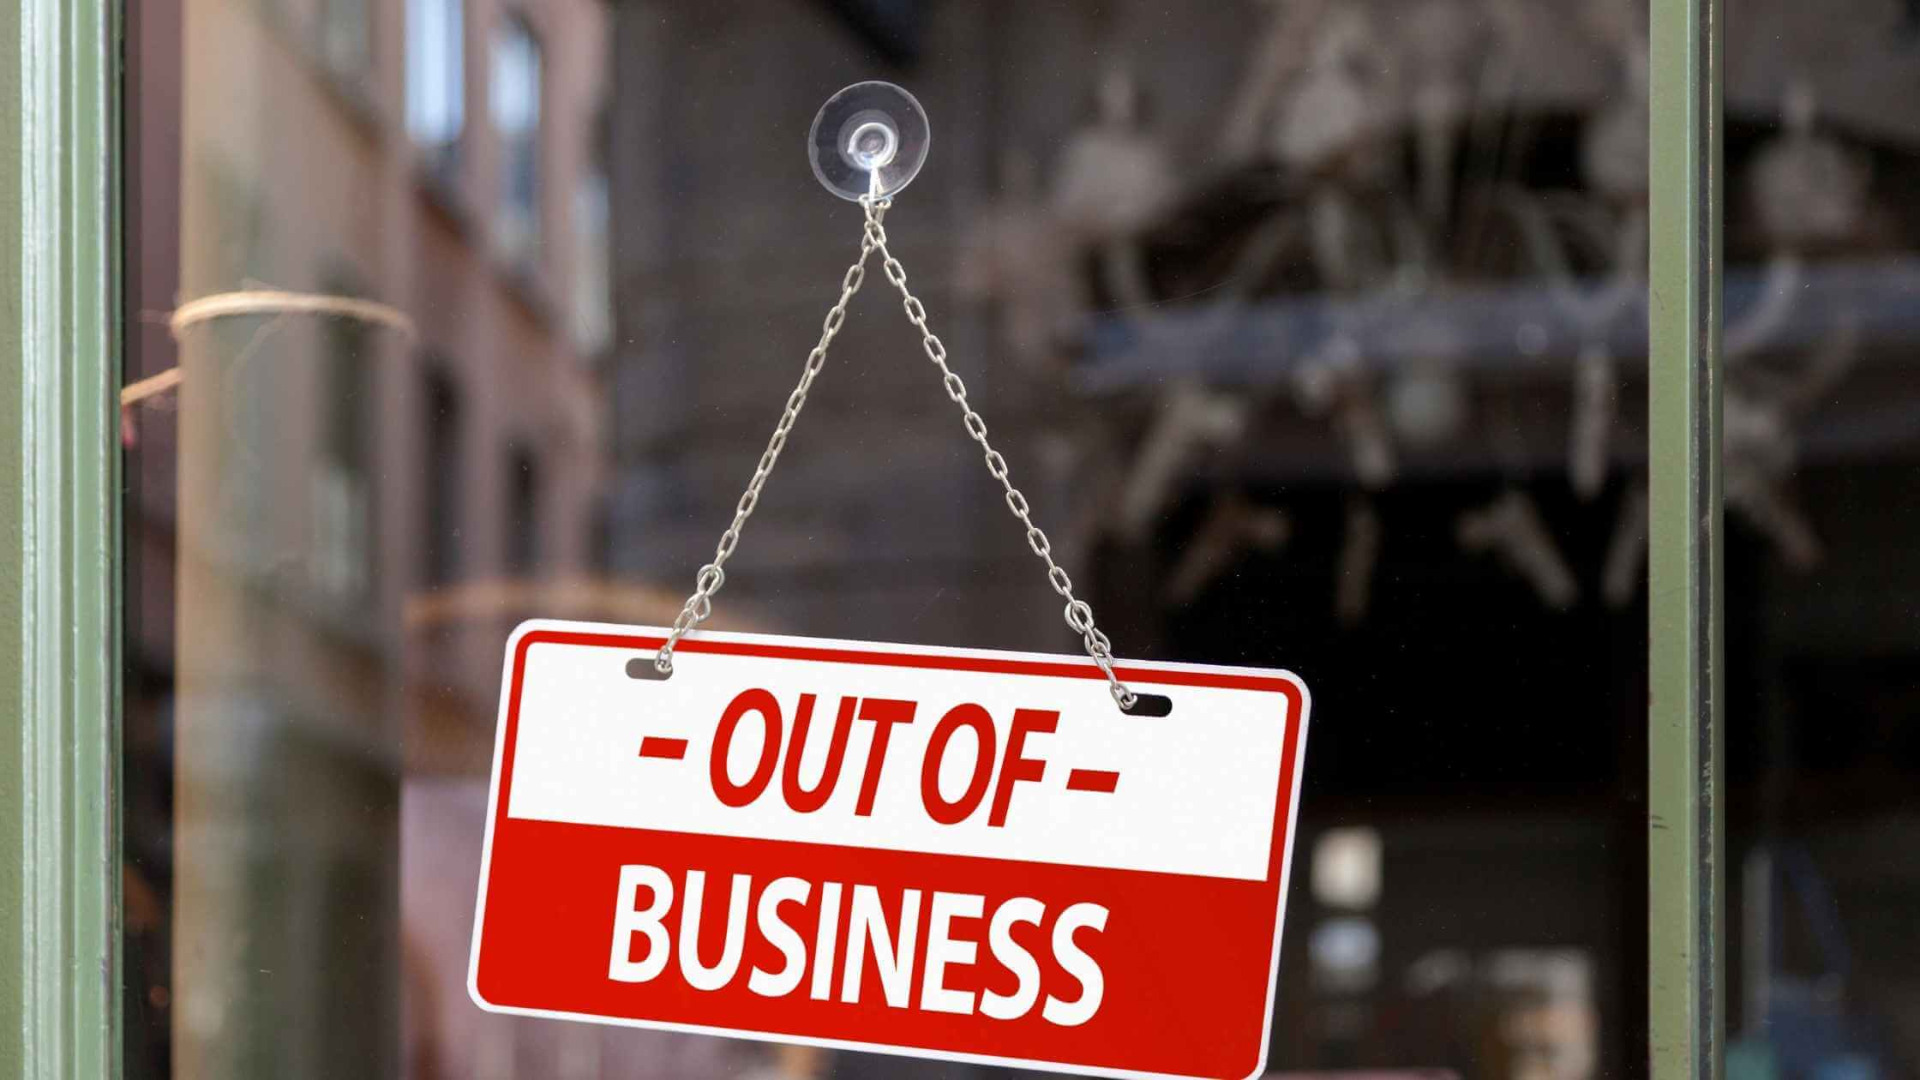 out of business sign in window